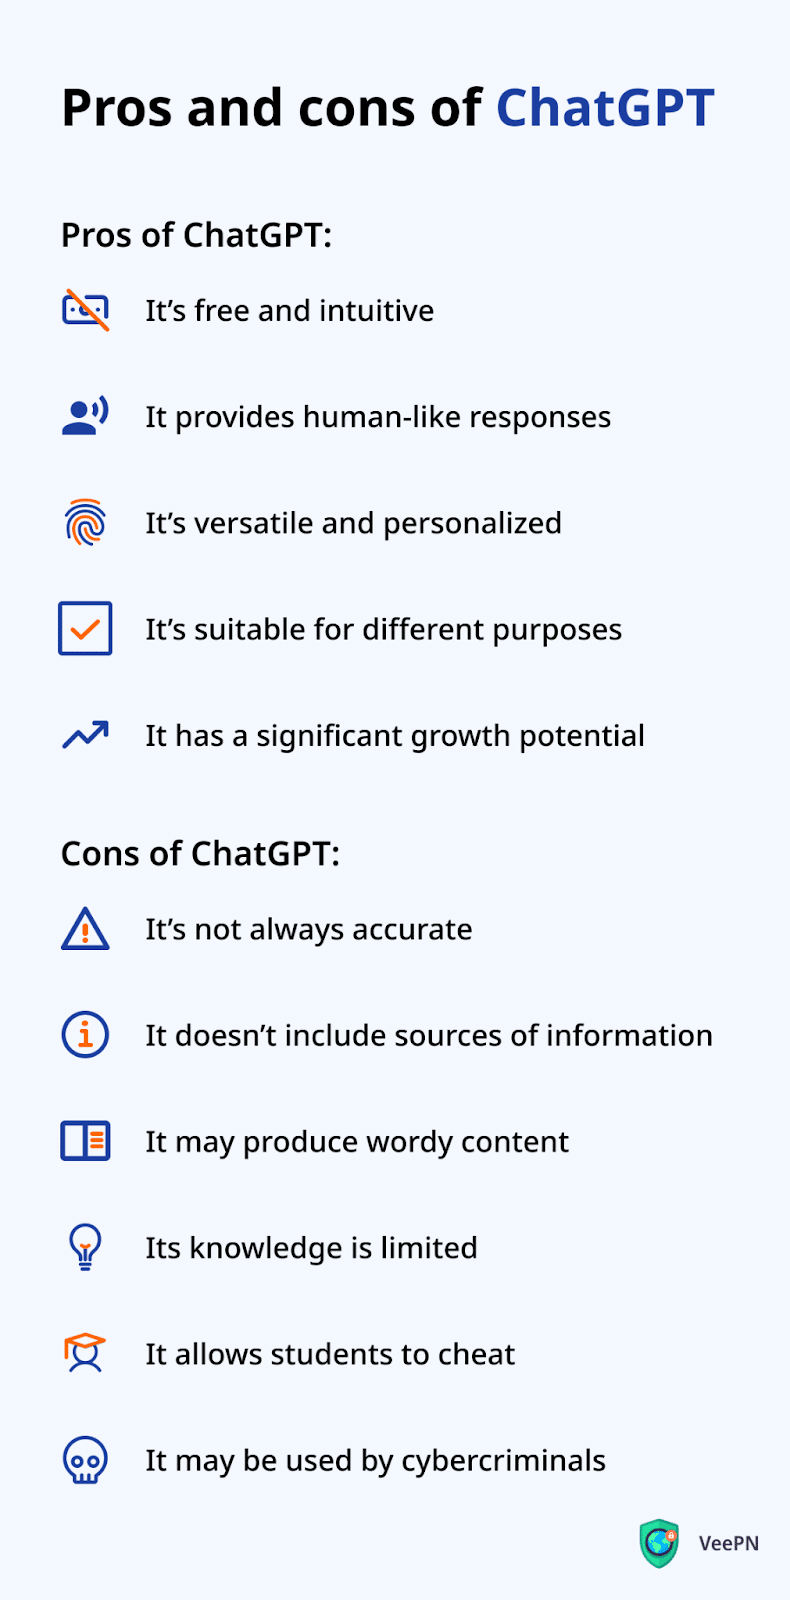 Pros and cons of ChatGPT